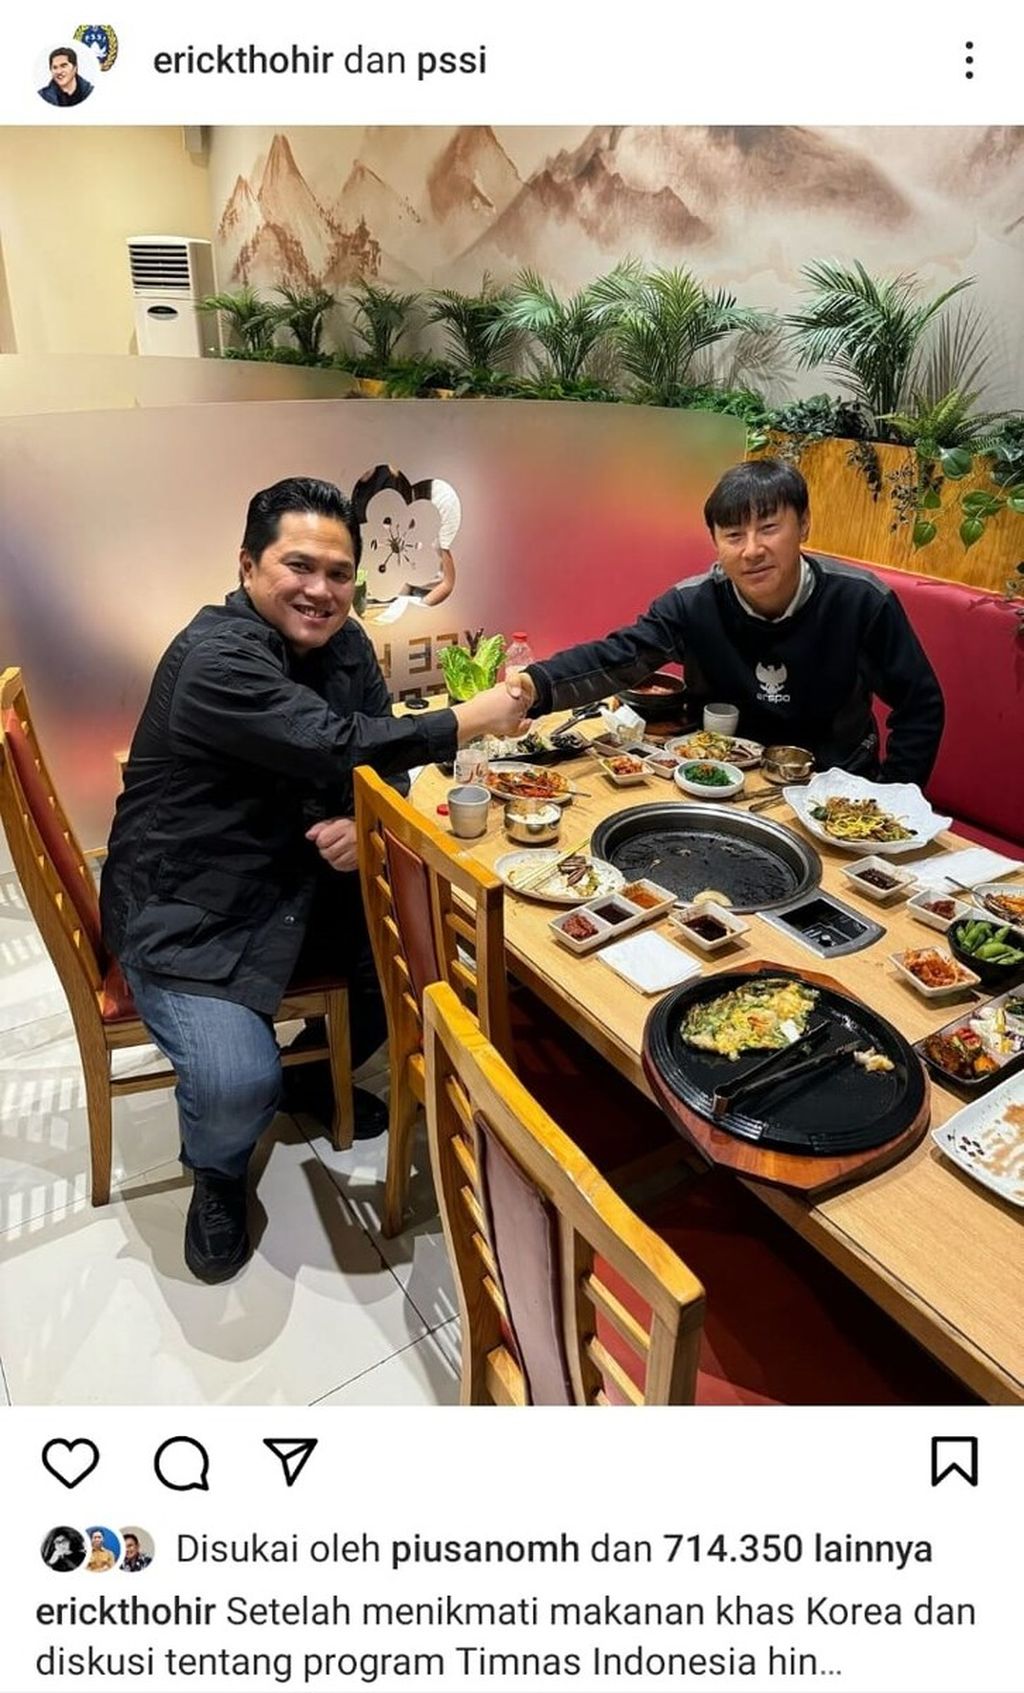 PSSI Chairman Erick Thohir and national team coach Shin Tae-yong had a meal together in Doha, Qatar, during the U-23 2024 Asia Cup.